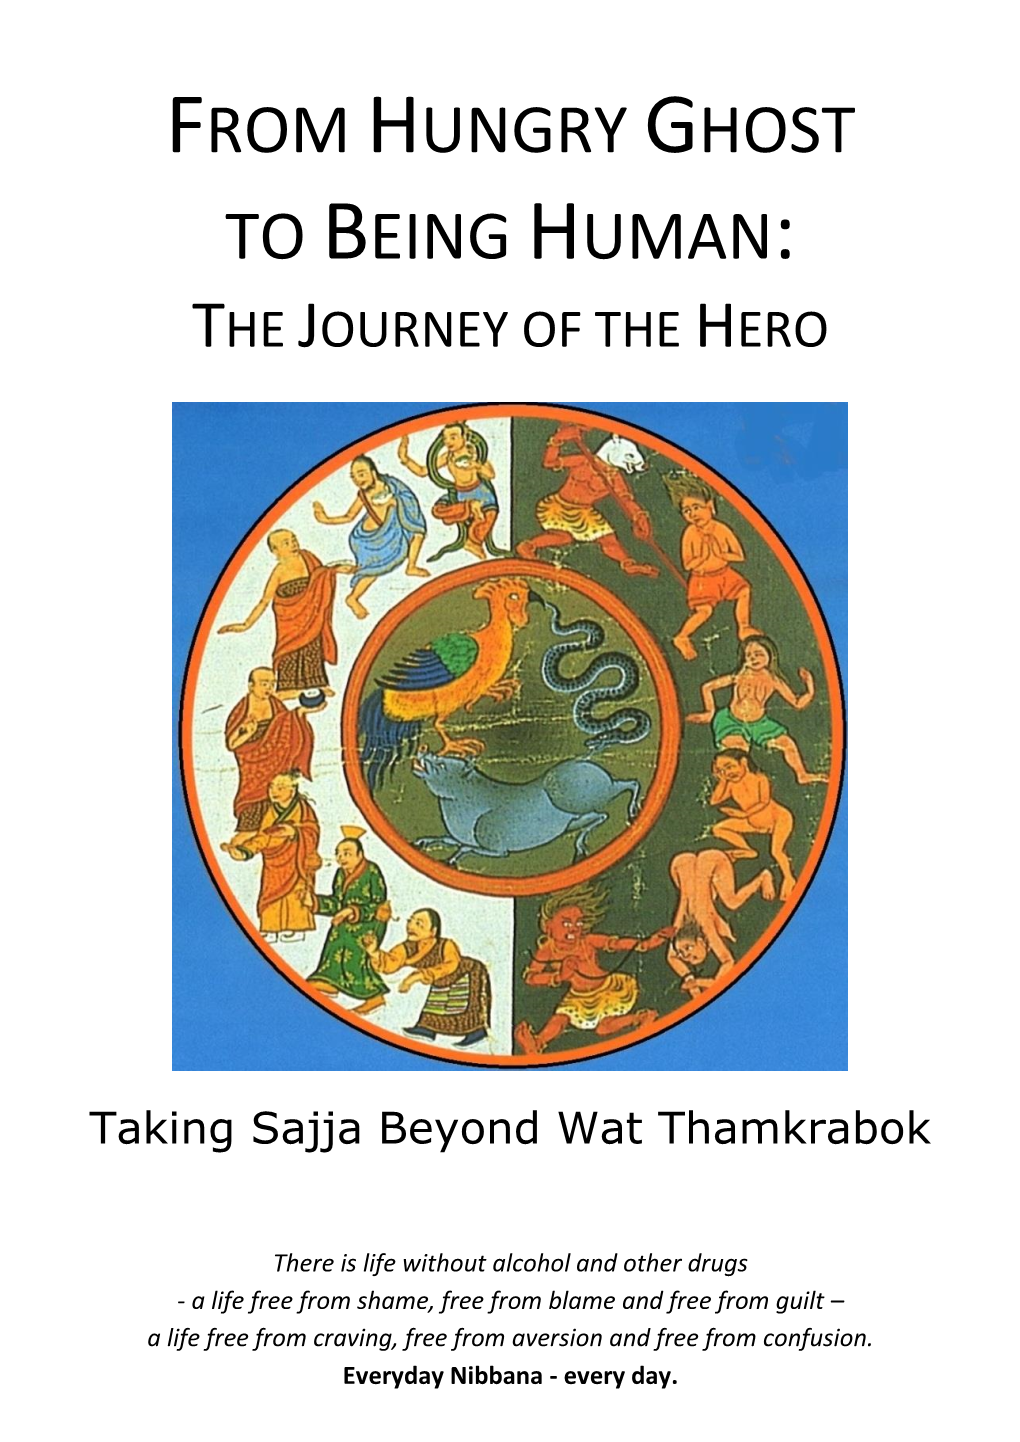 From-Hungry-Ghost-To-Being-Human-(Taking-Sajja-Beyond-Thamkrabok)